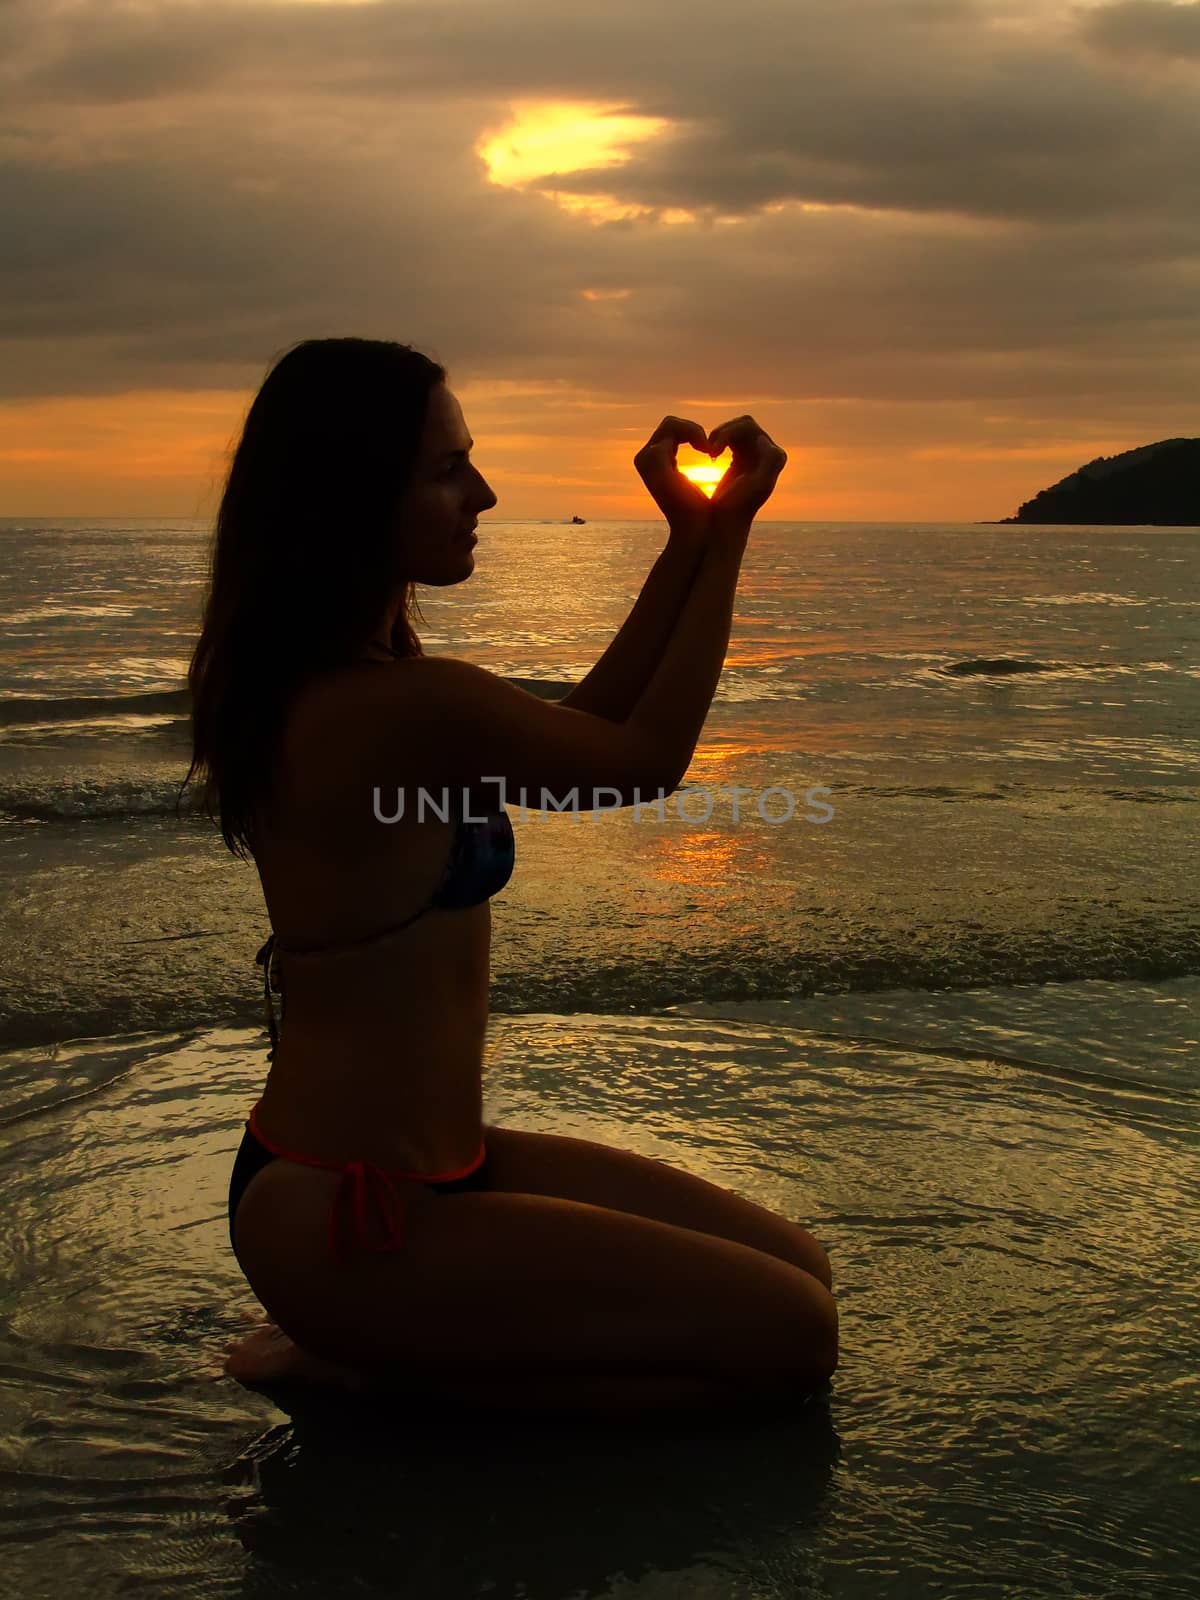 Young woman shaping heart with her hands at sunset, Langkawi isl by donya_nedomam